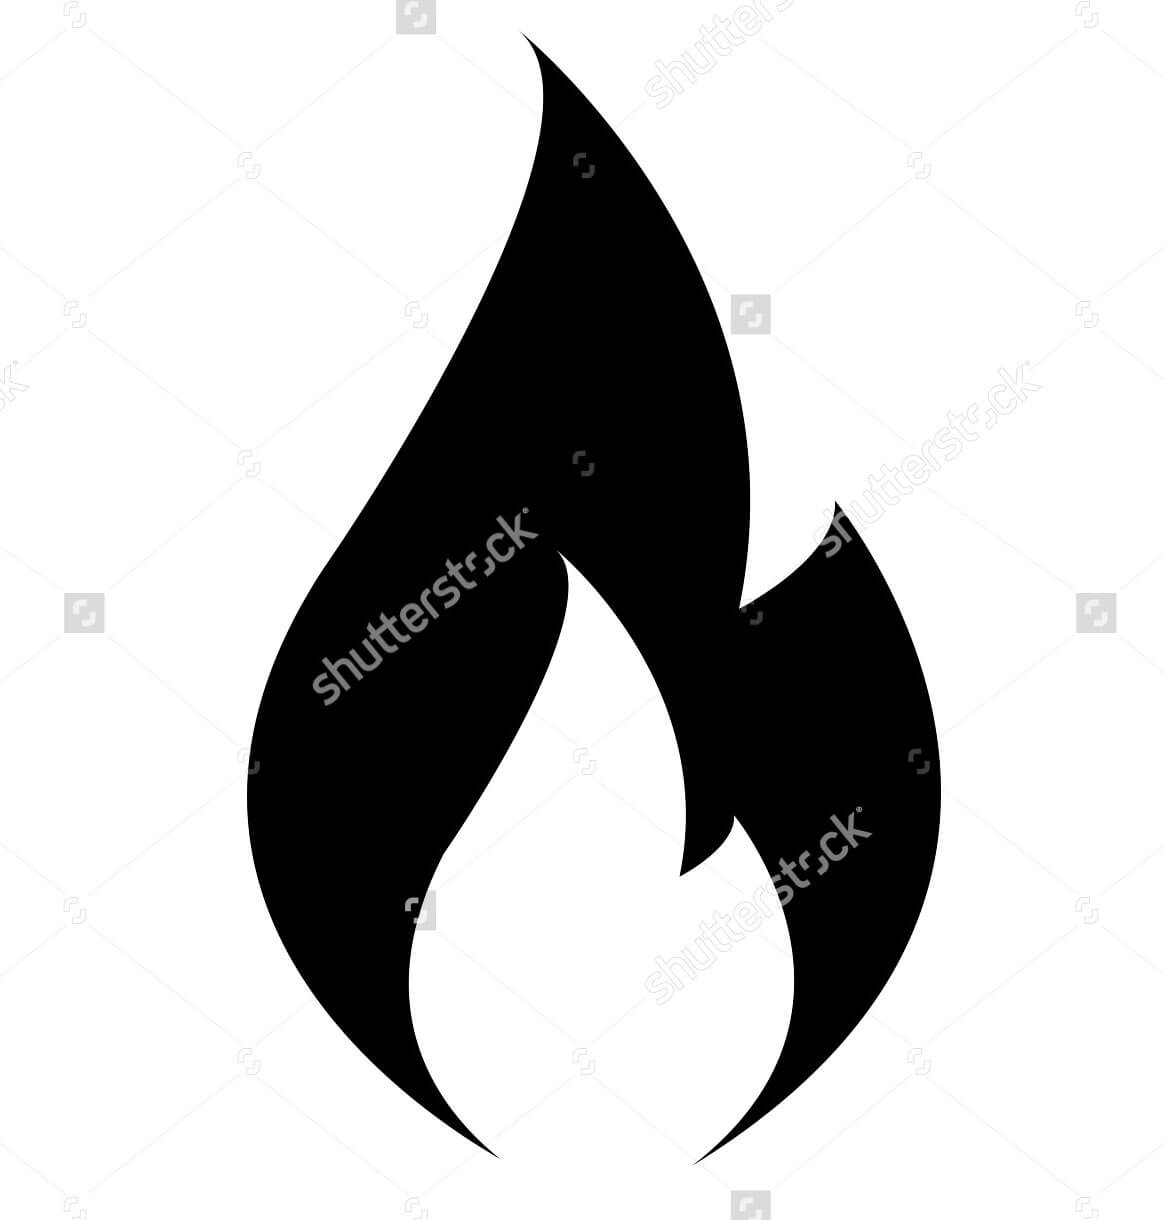 stock-vector-fire-flame-icon-vector-illustration-255842863